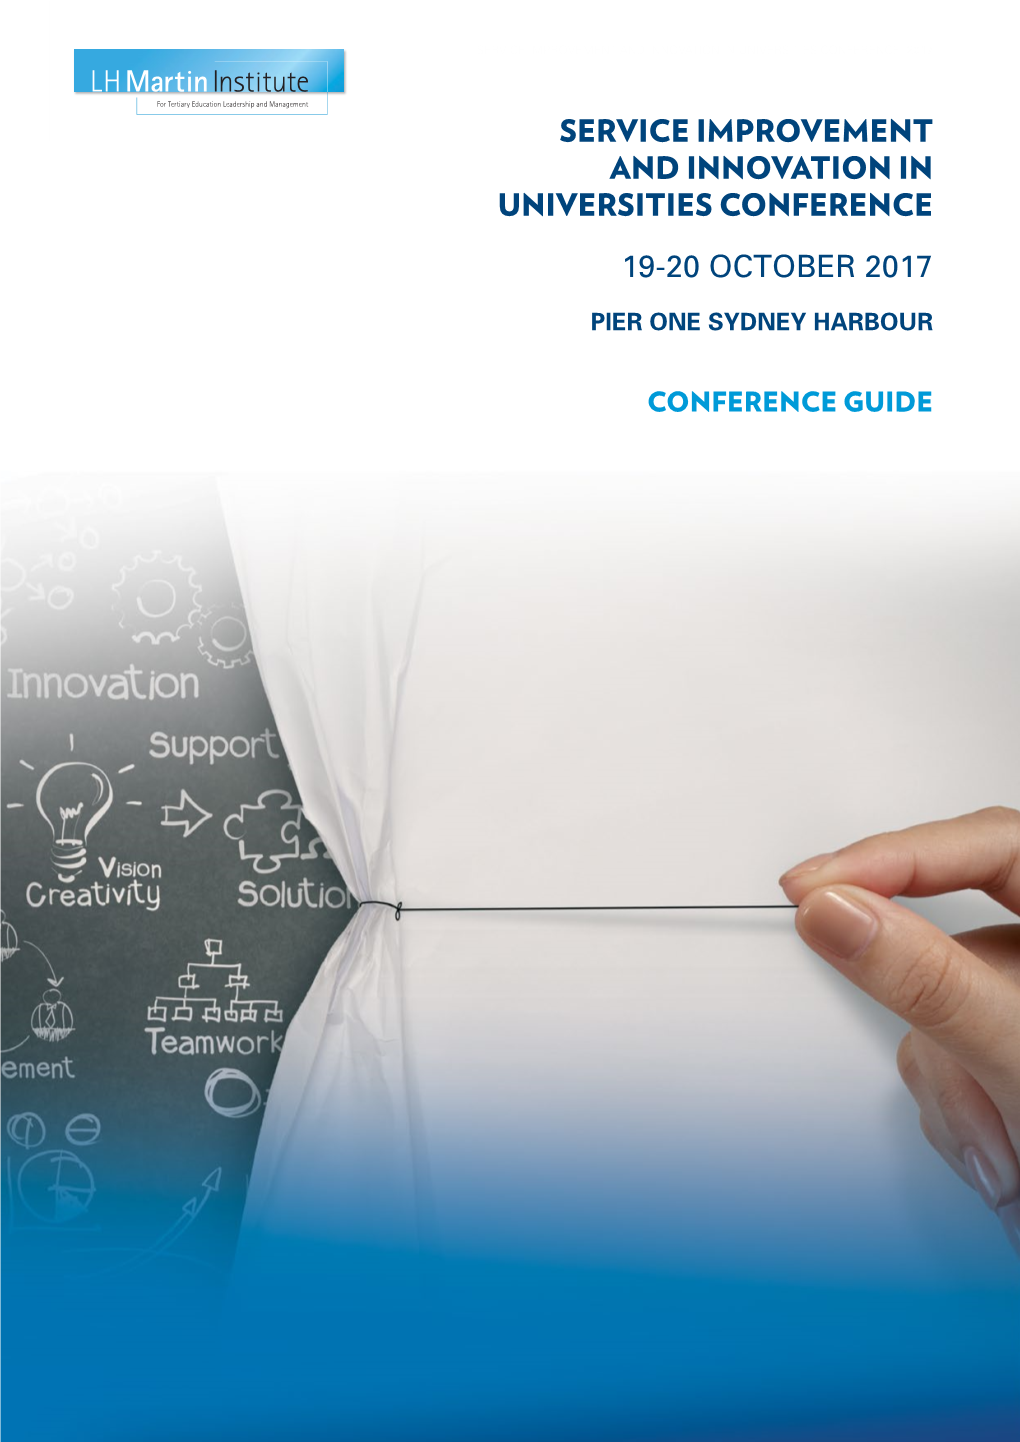 Service Improvement and Innovation in Universities Conference 2017